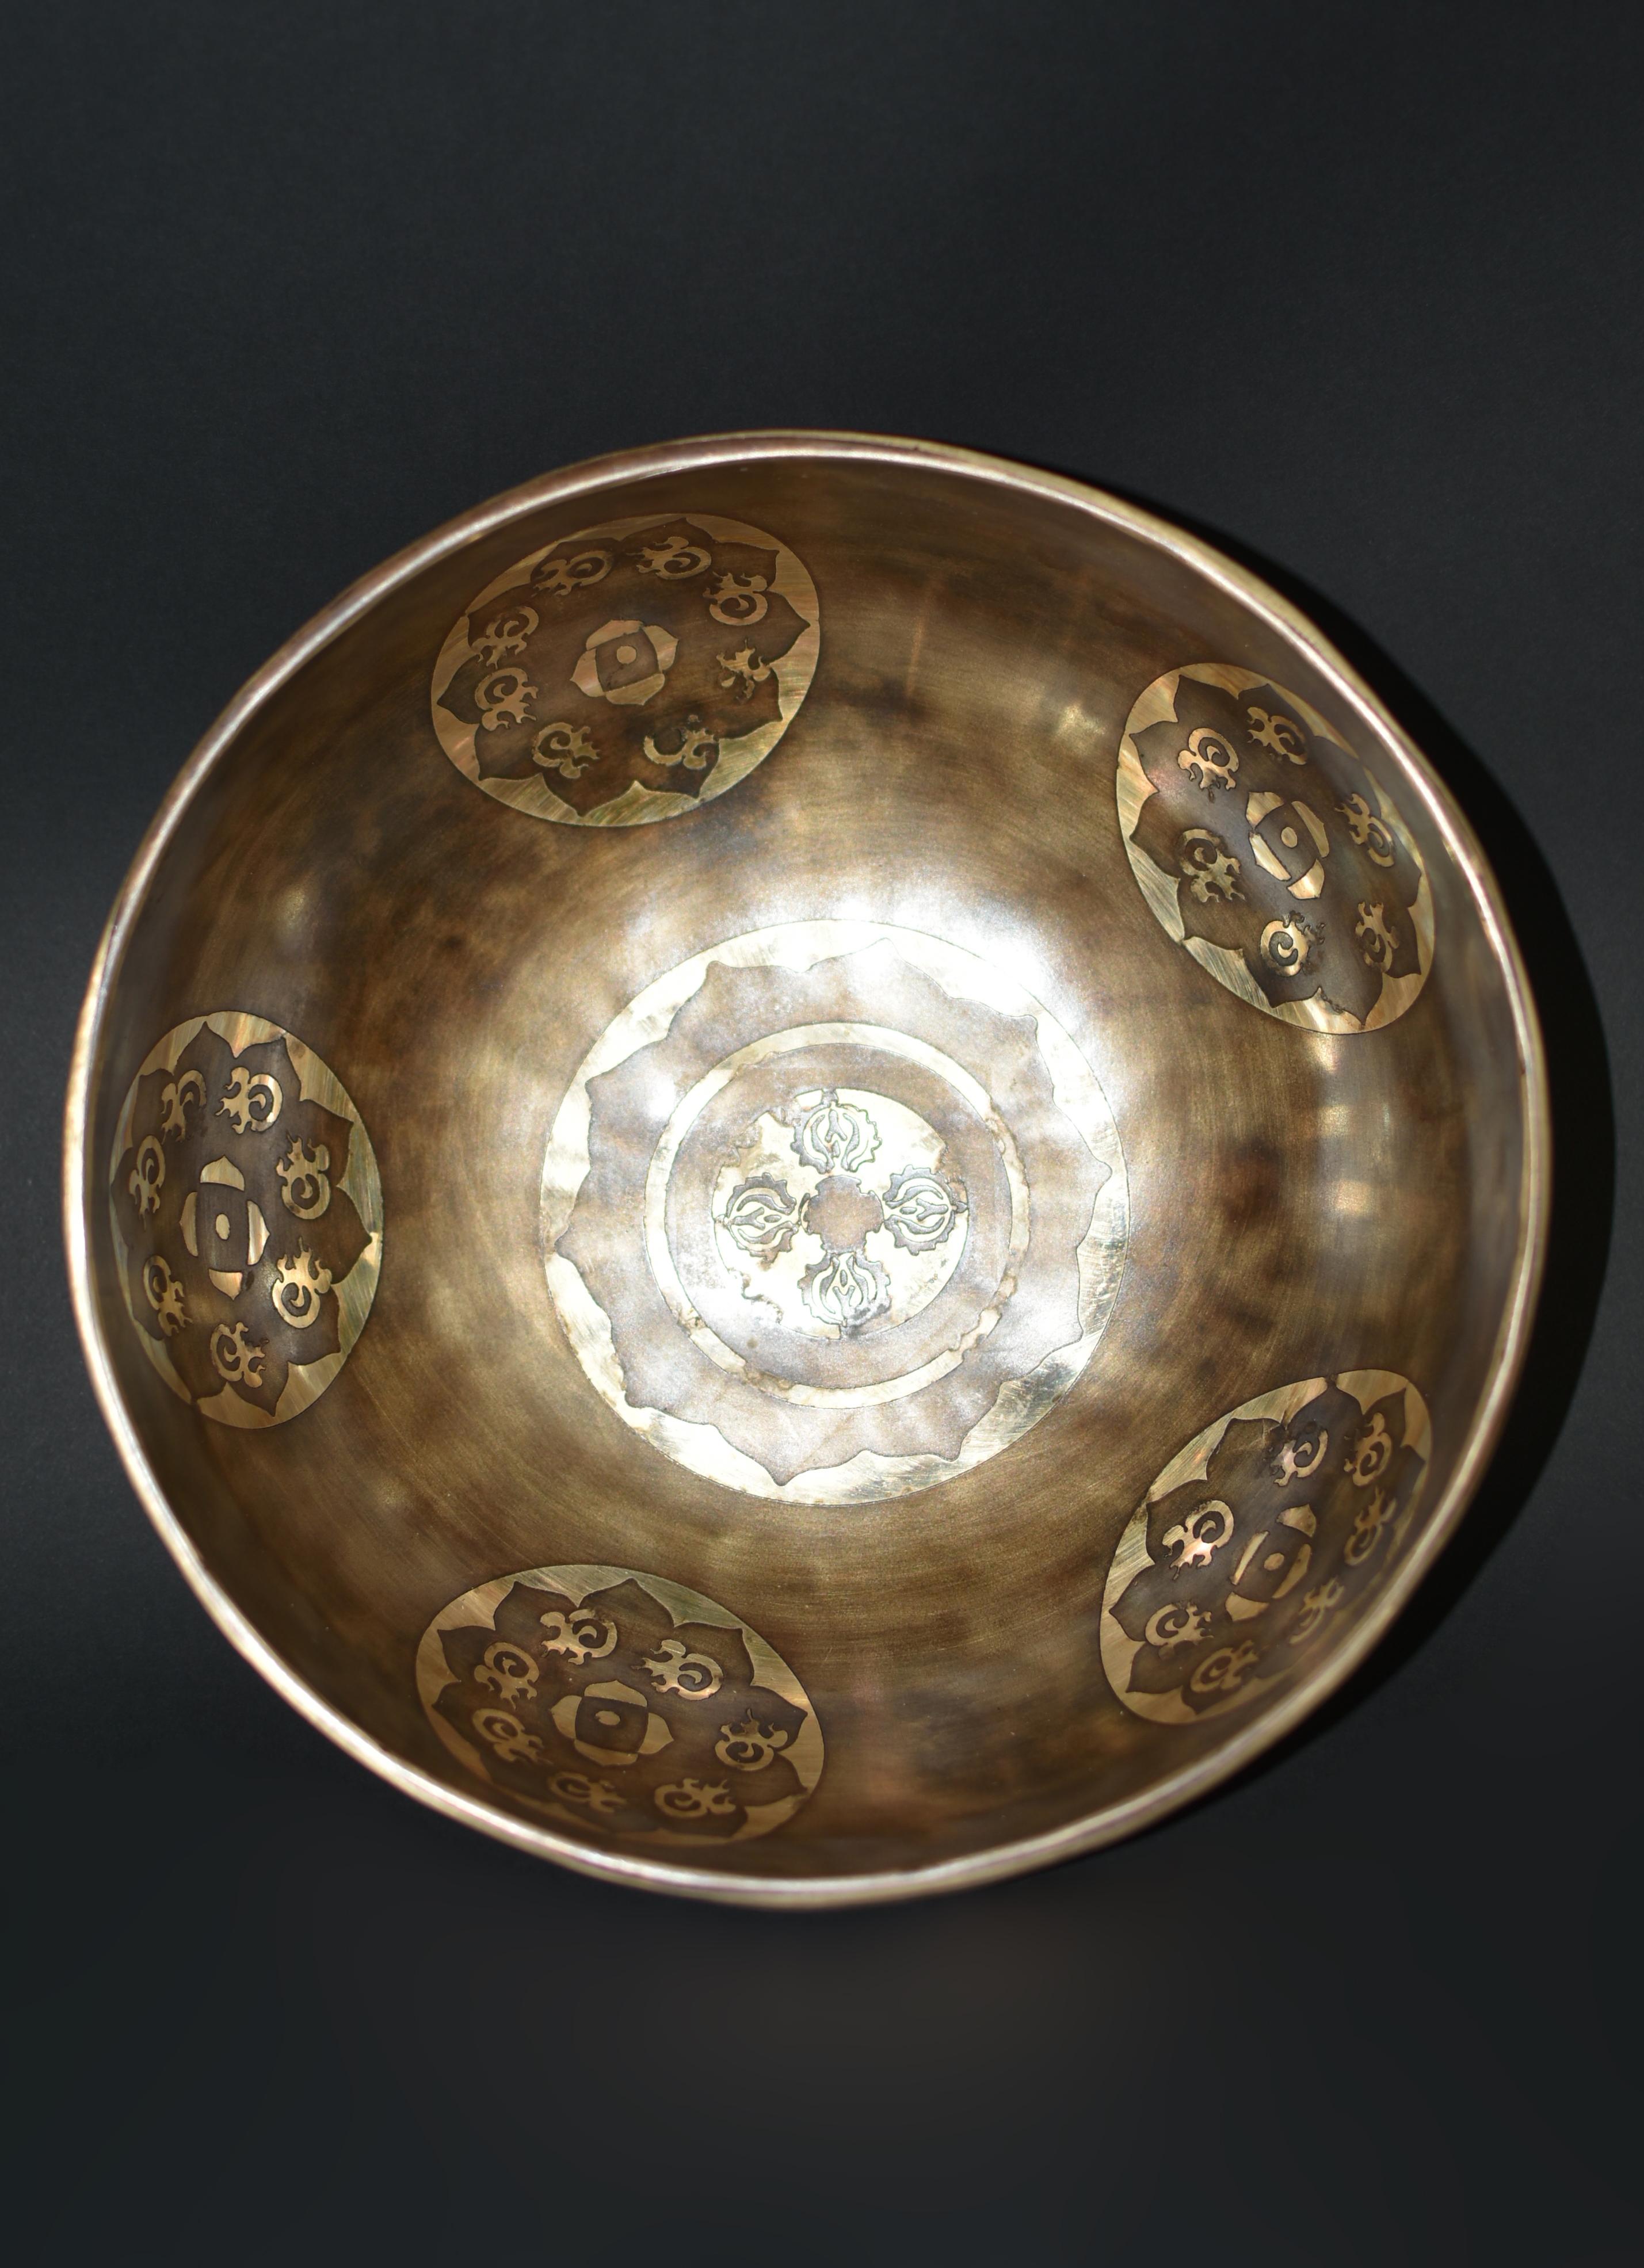 An extraordinary, one of a kind, D tone, 4.05 lb, fully engraved, inlaid, finely crafted singing bowl made by the spiritual craftsmen of Nepal. The interior depicts a center medallion surrounded by five circles, all with a background of open lotus